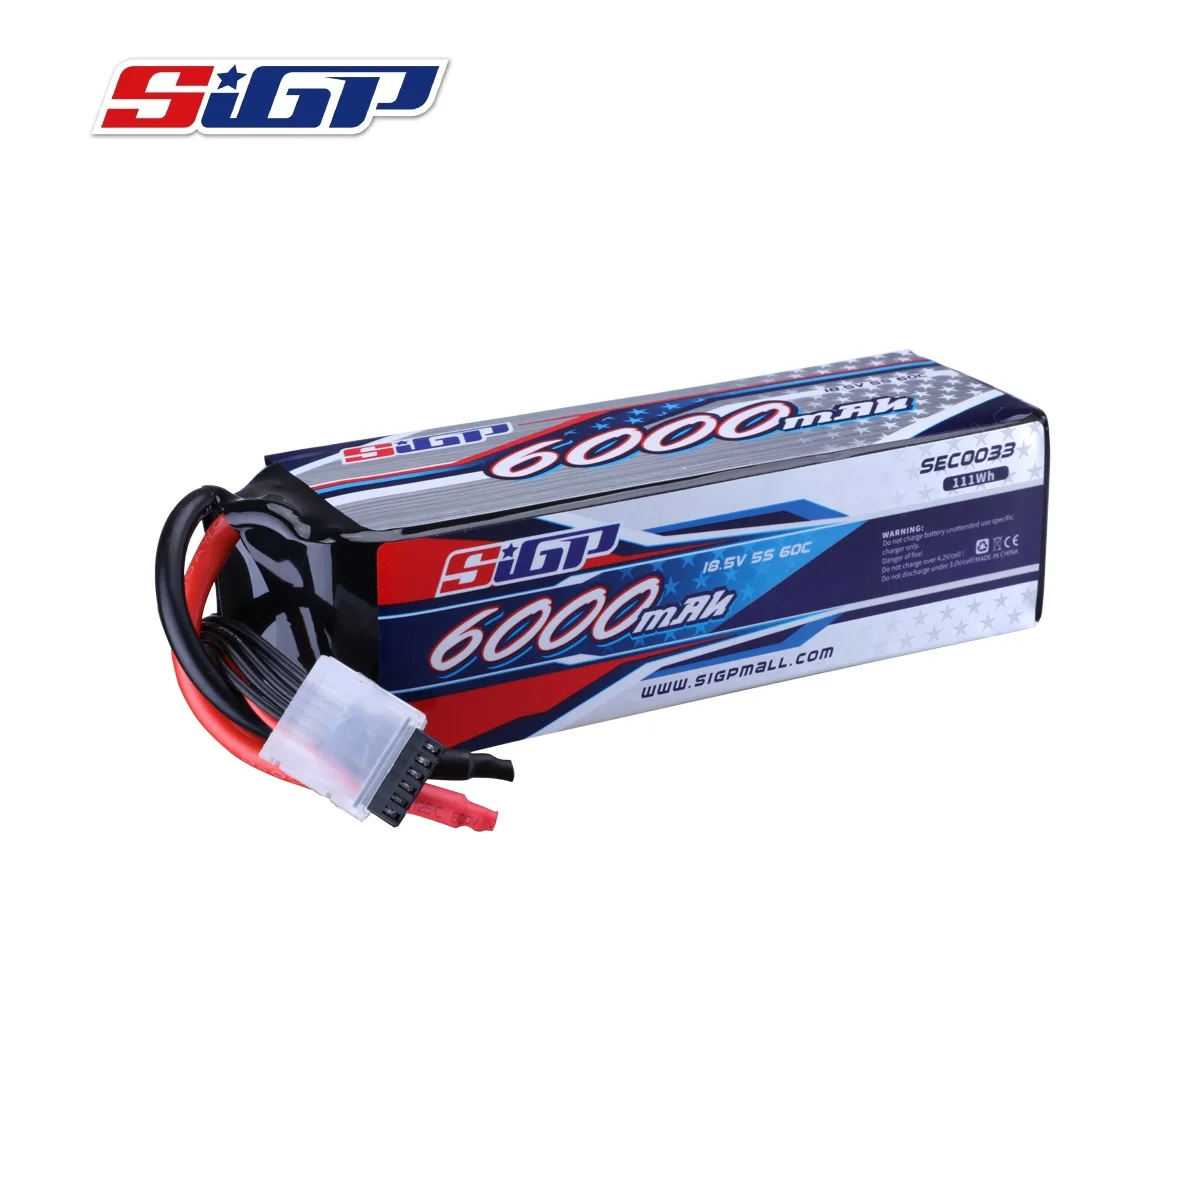 SIGP 5S 18.5V Lipo Battery 6000mAh 60C Big Capacity Soft Pack for RC Helicopter Airplane FPV Drone Quadcopter Racing Hobby enlarge